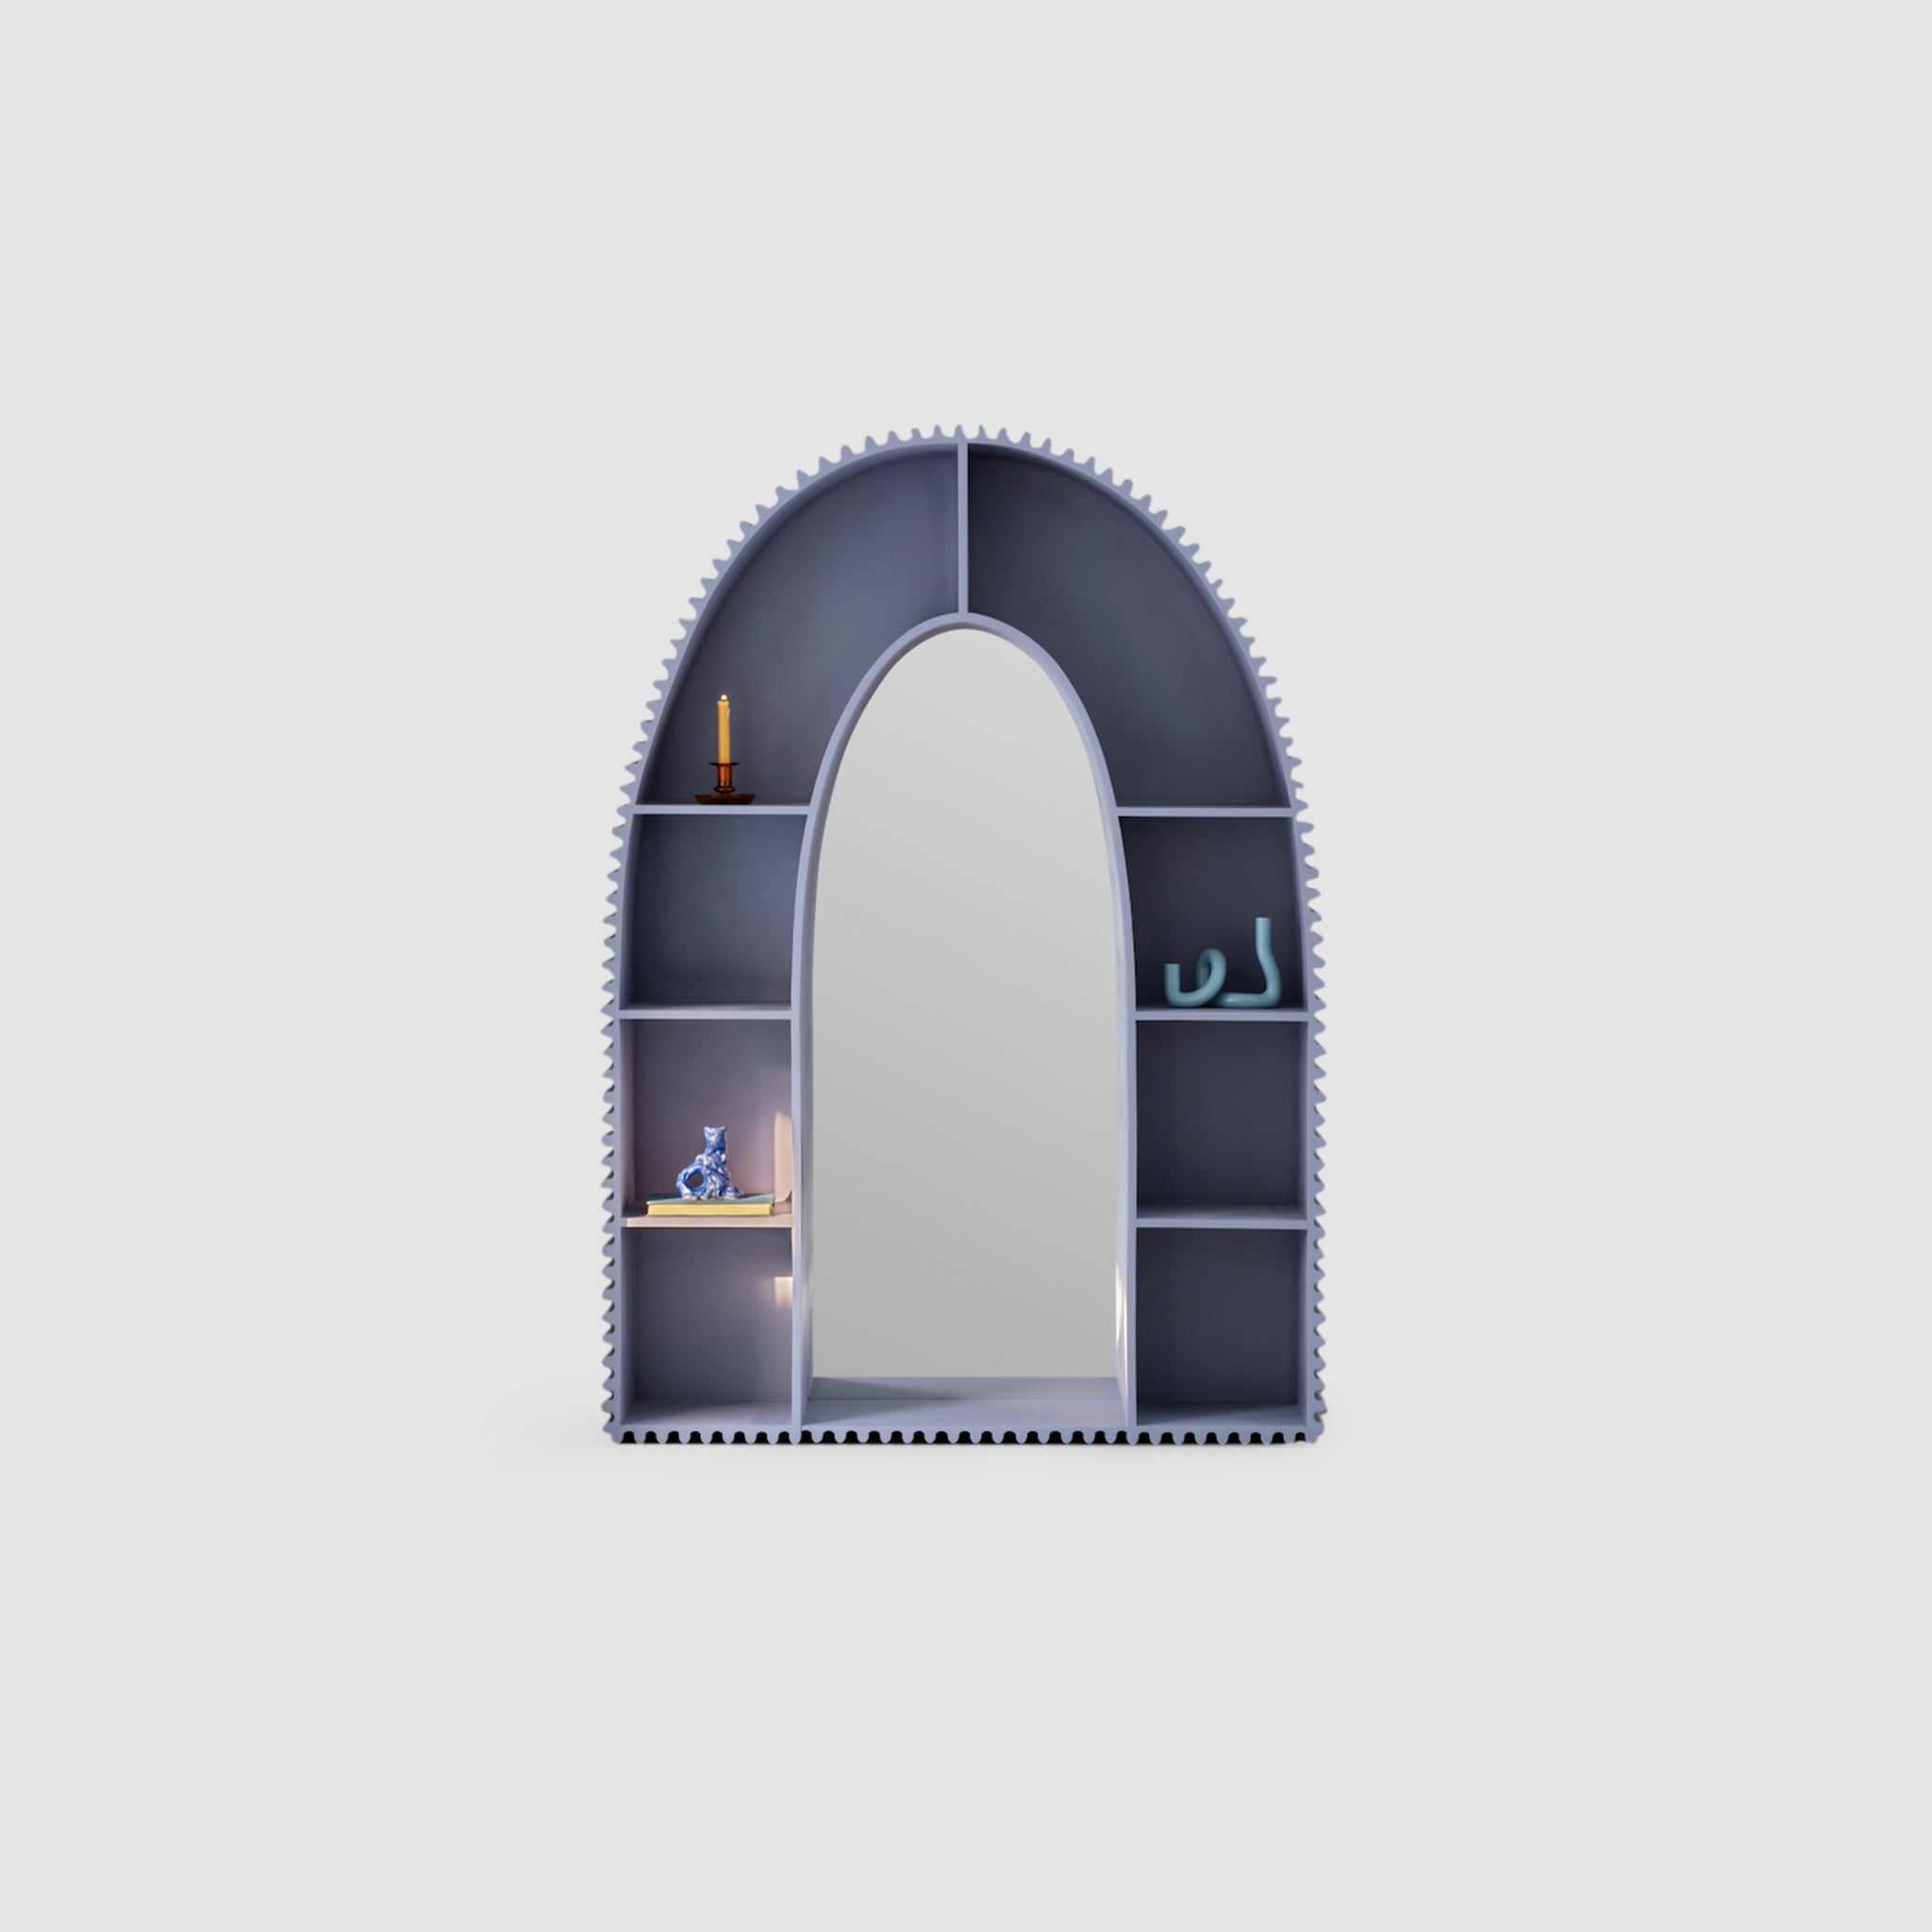 A modern, arch-shaped bookshelf in muted gray with integrated mirror in the center, surrounded by small compartments containing a candle, a decorative figurine, and other small items against a plain white background.